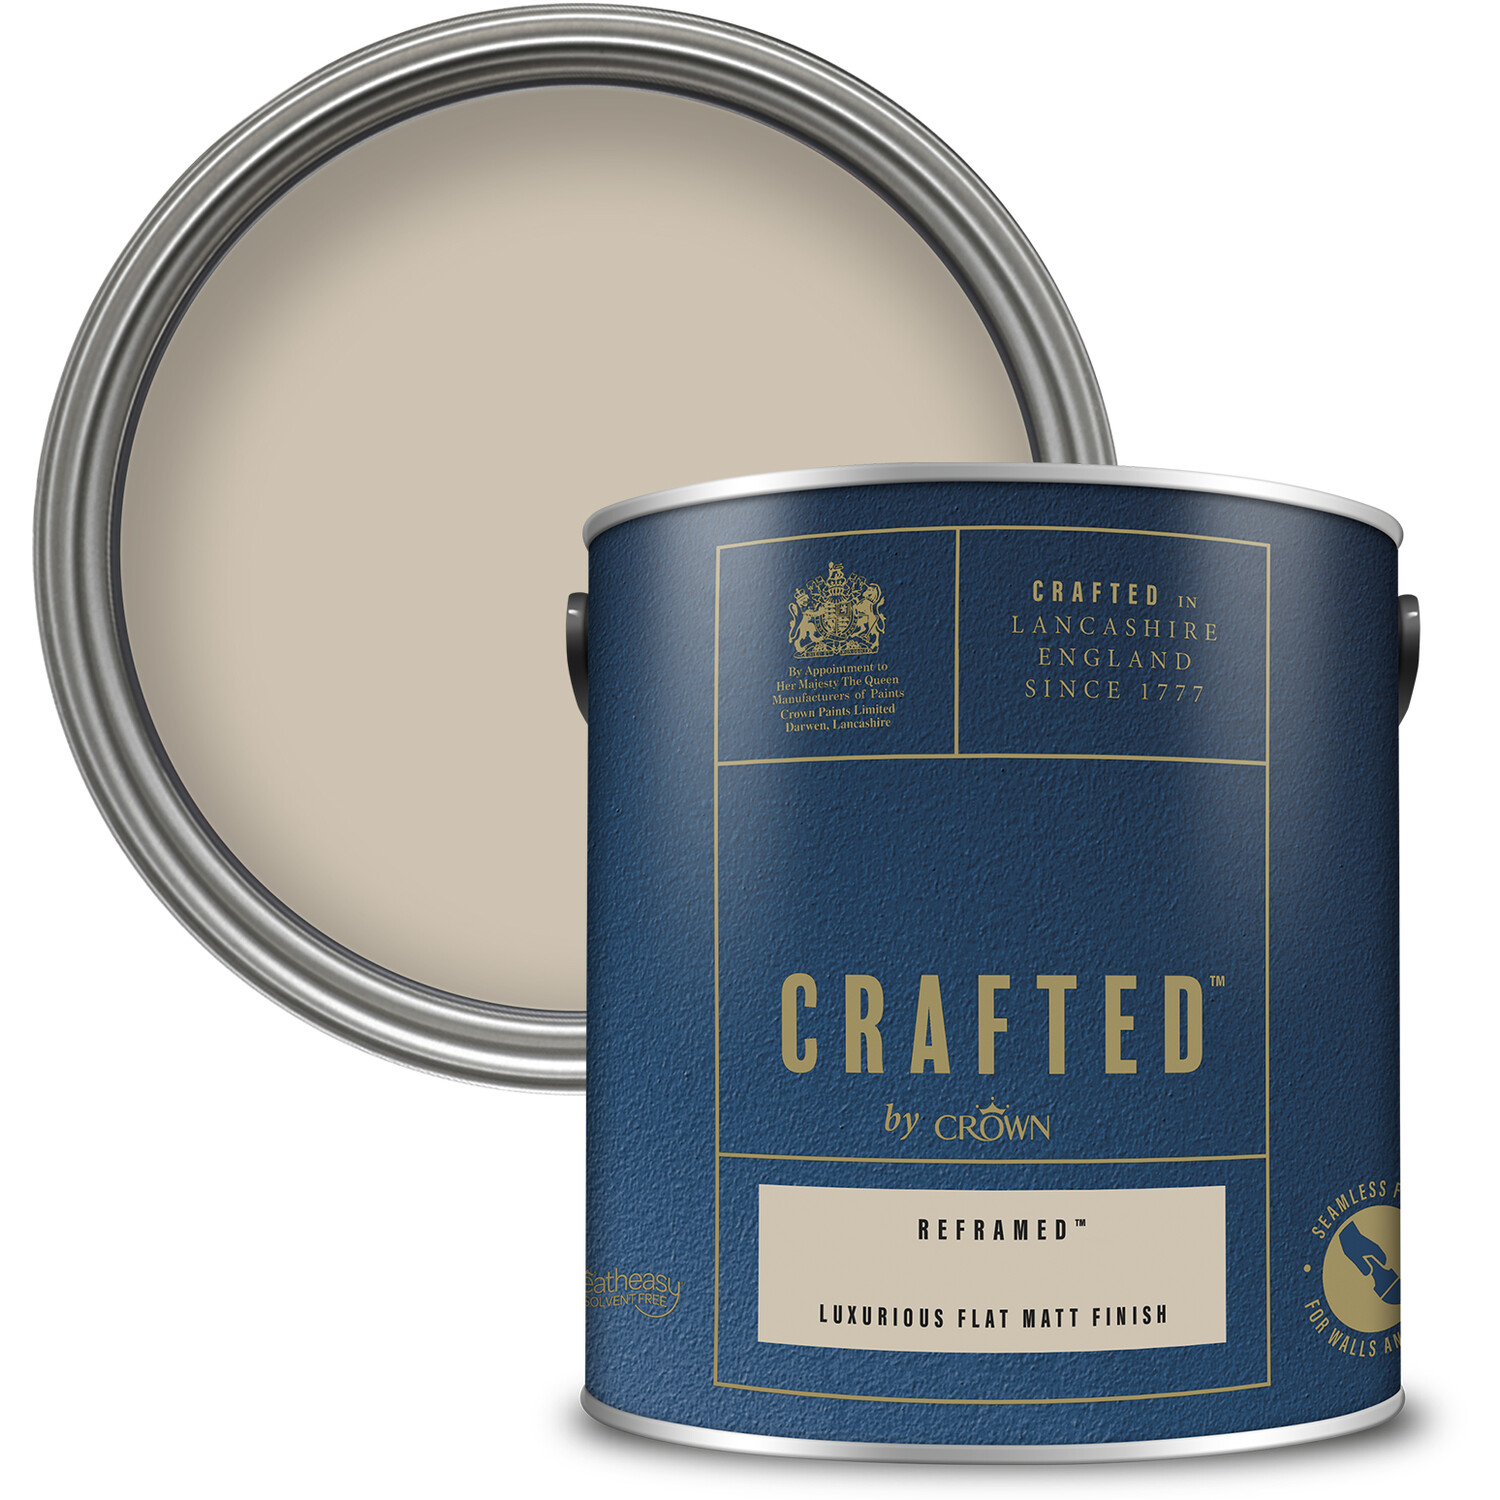 Crown Crafted Walls and Wood Reframed Luxurious Flat Matt Paint 2.5L Image 1